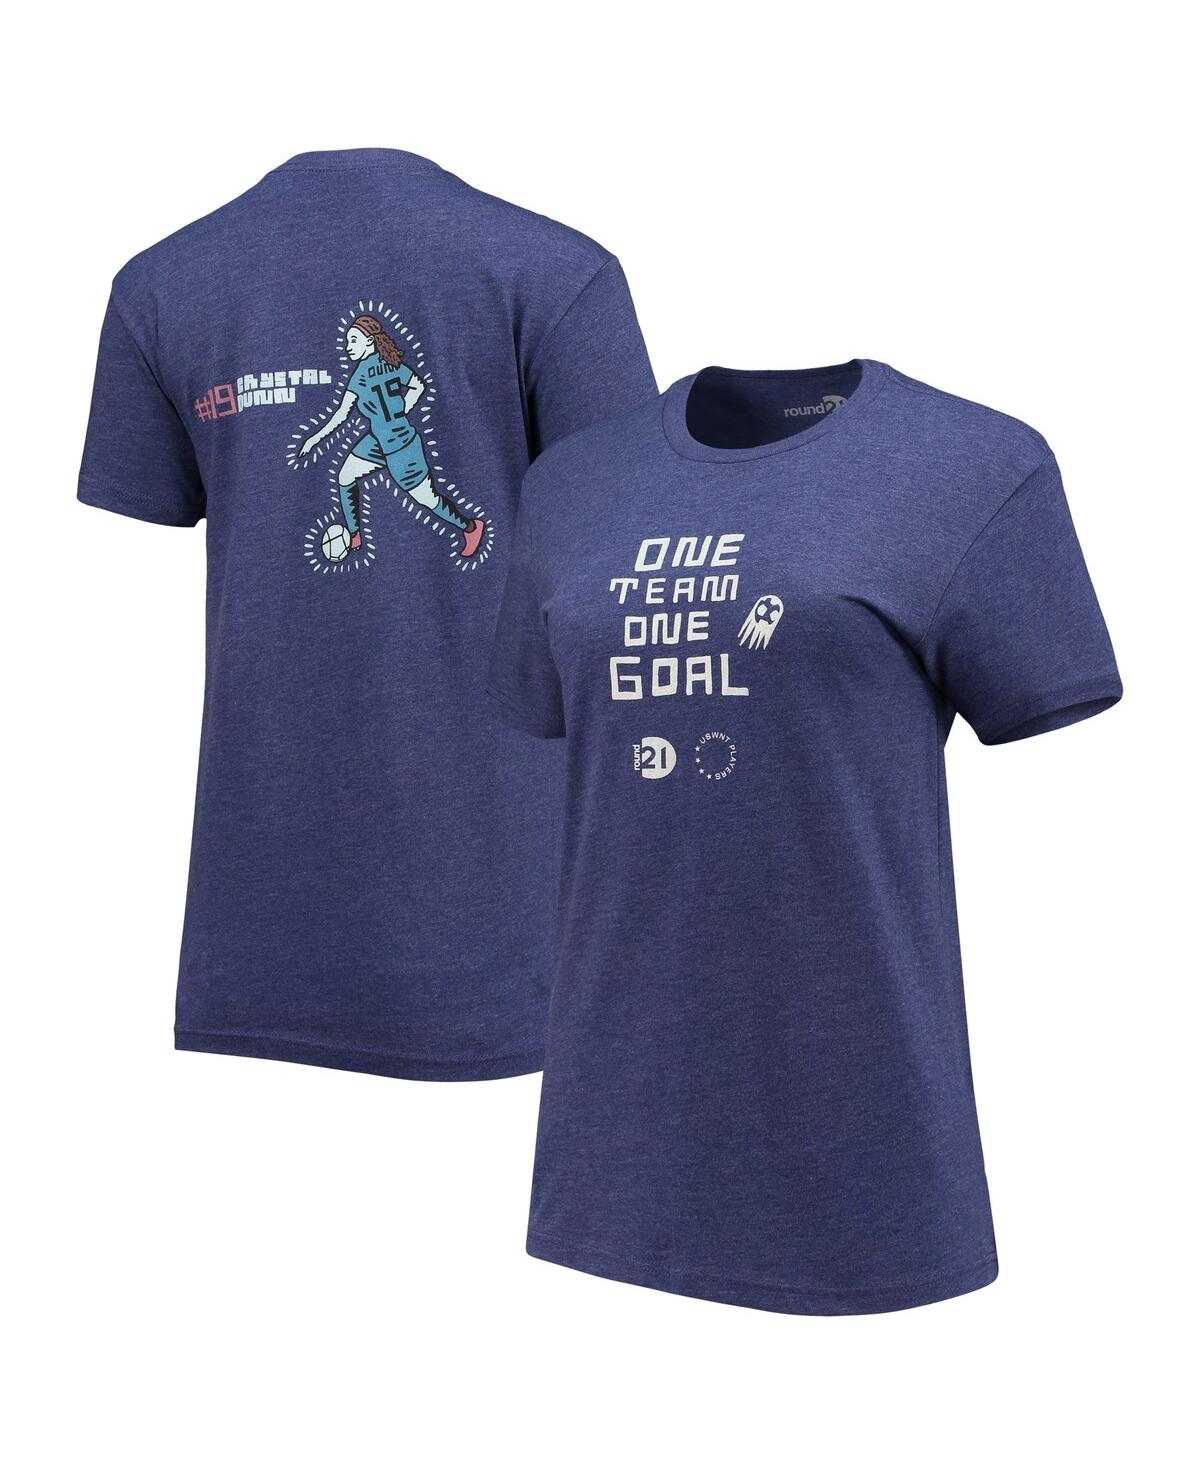 ROUND21 WOMEN'S ROUND21 CRYSTAL DUNN NAVY USWNT ONE TEAM ONE GOAL T-SHIRT